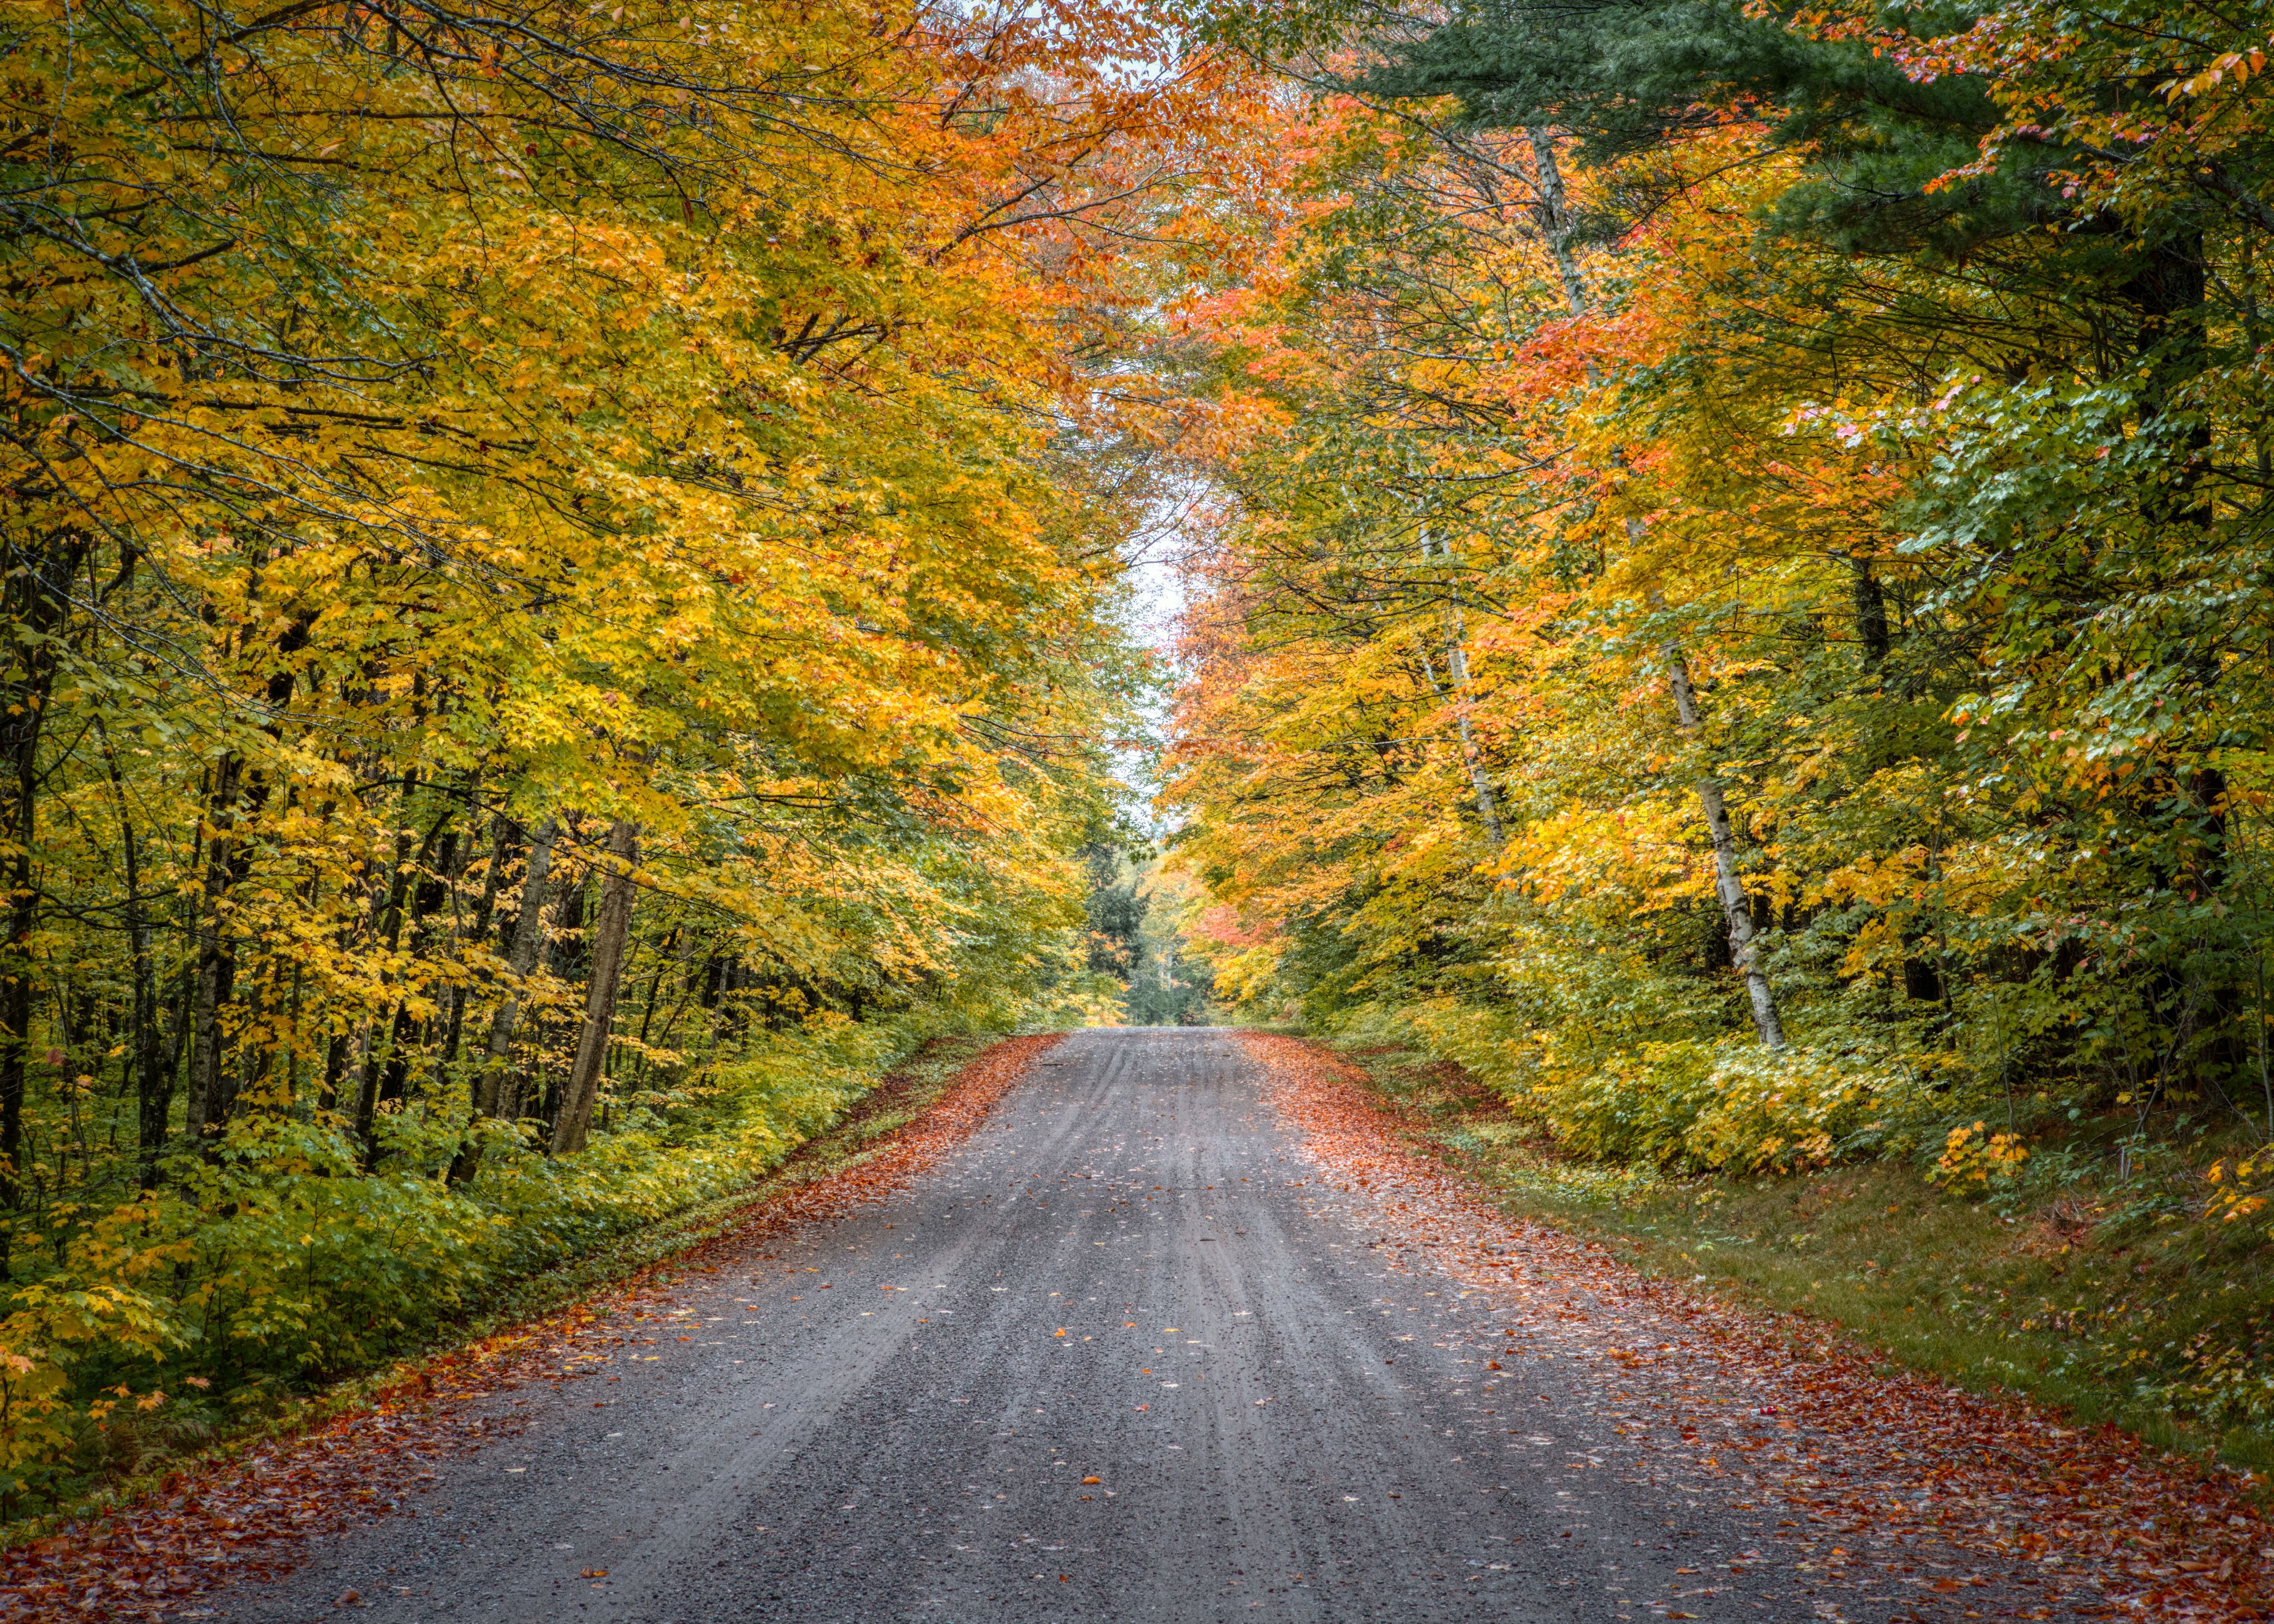 An image of a Wisconsin country road surrounded by trees.